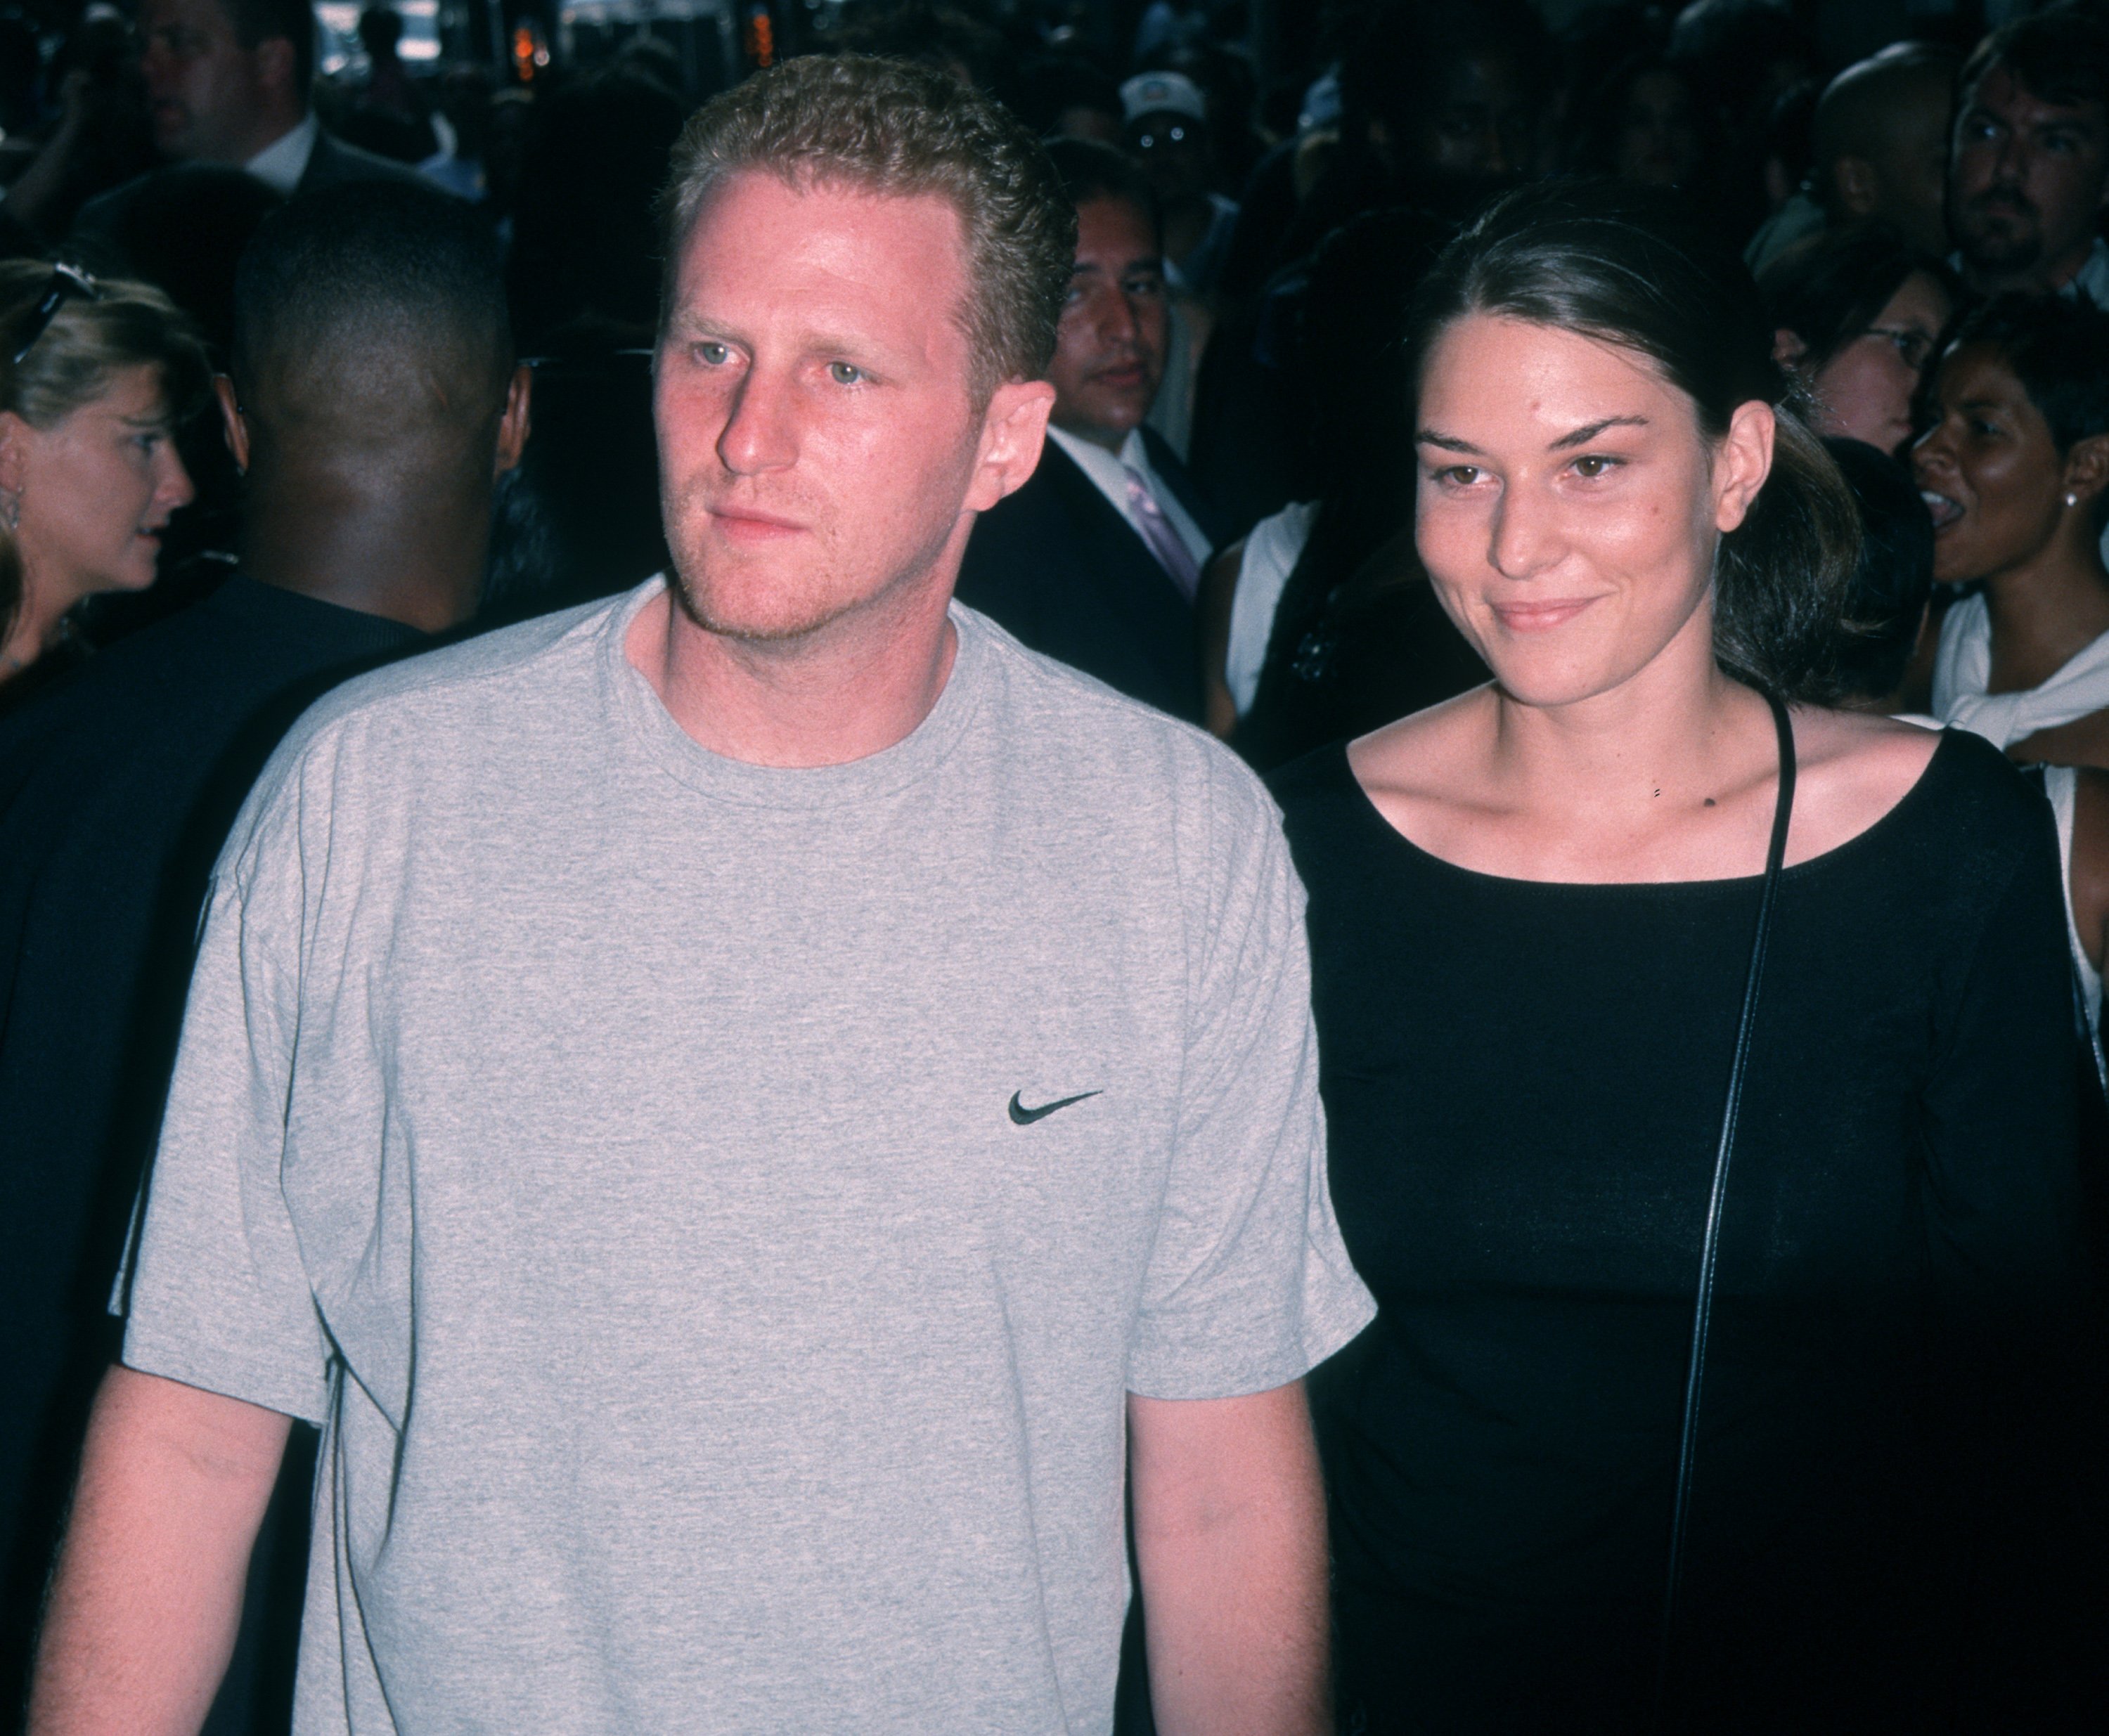 Michael Rapaport and Nichole Beatty at the premiere of "Summer of Sam" in New York City, in 1999. | Source: Getty Images 